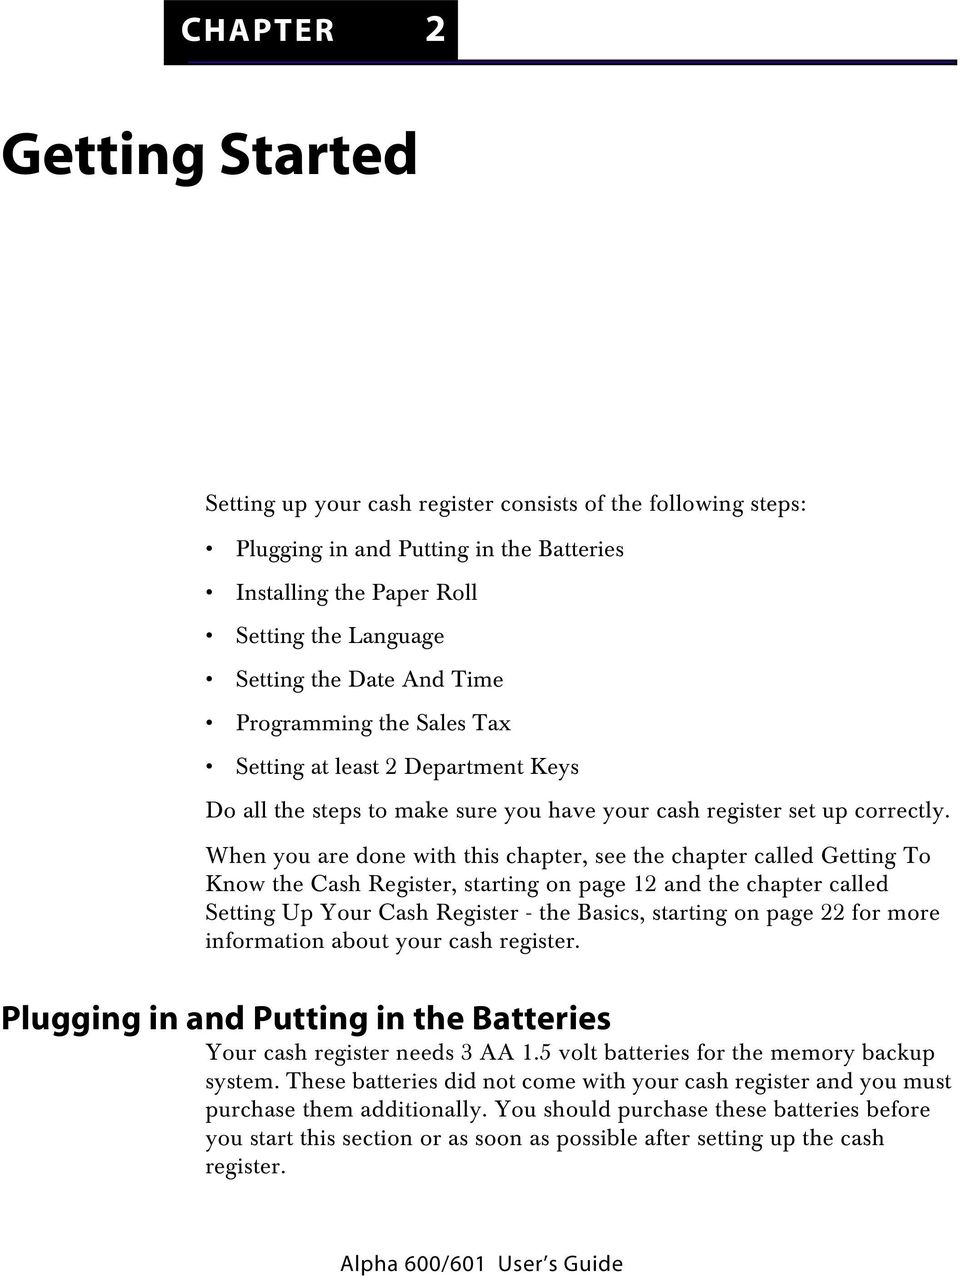 When you are done with this chapter, see the chapter called Getting To Know the Cash Register, starting on page 12 and the chapter called Setting Up Your Cash Register - the Basics, starting on page